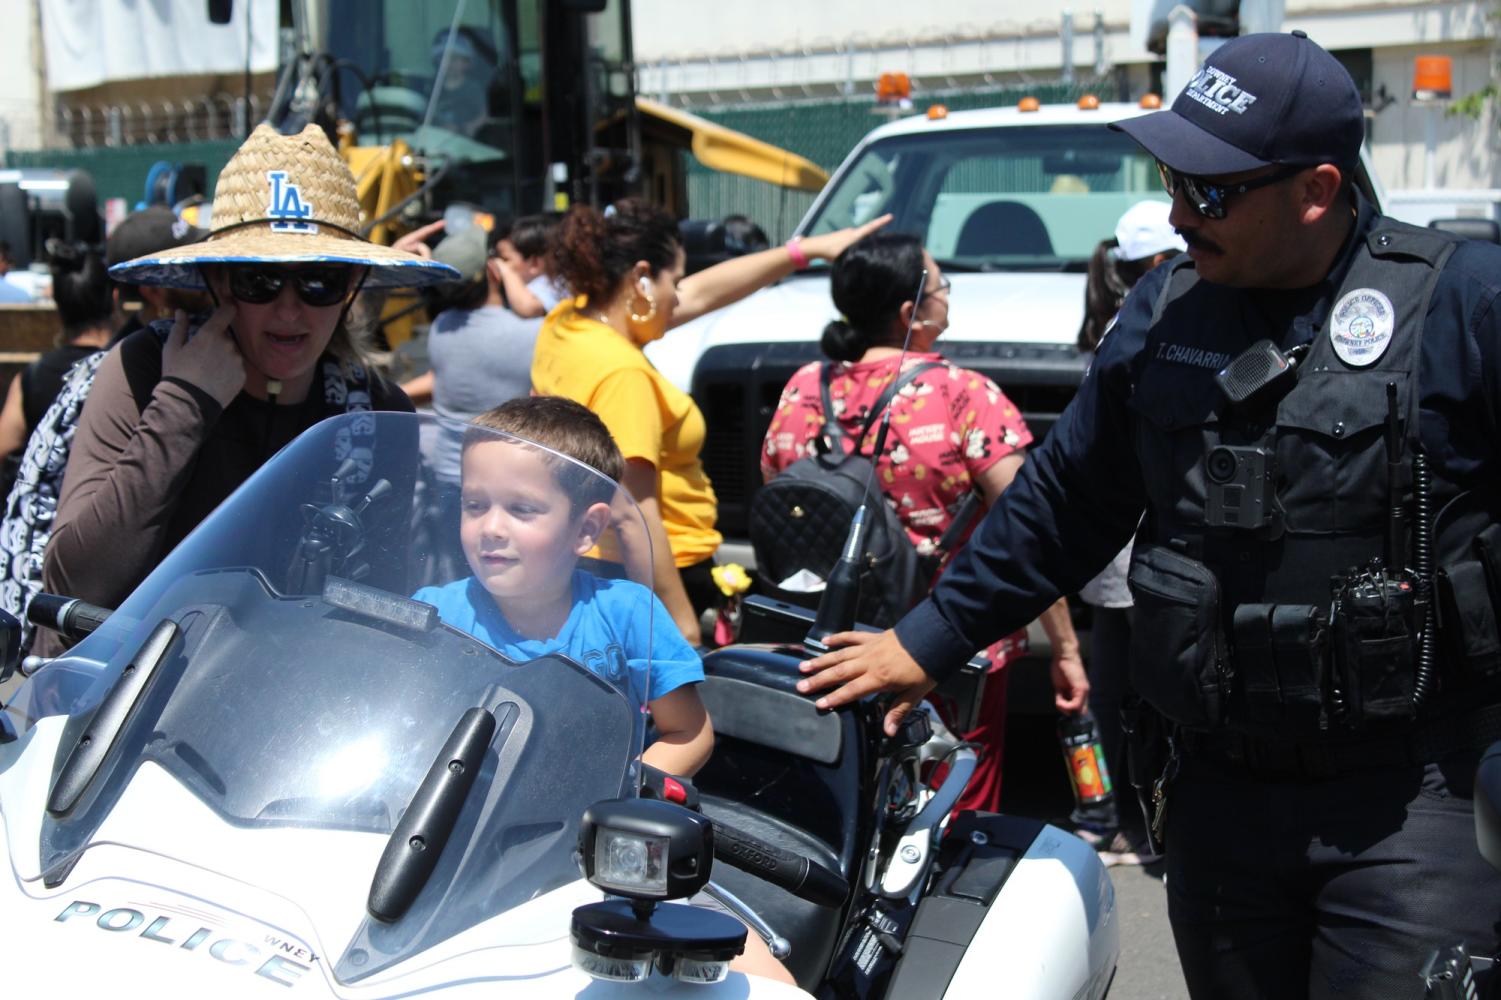 Police officers at the event gave children the opportunity to allow them to ride the motorbike, as well as turn on the siren. 